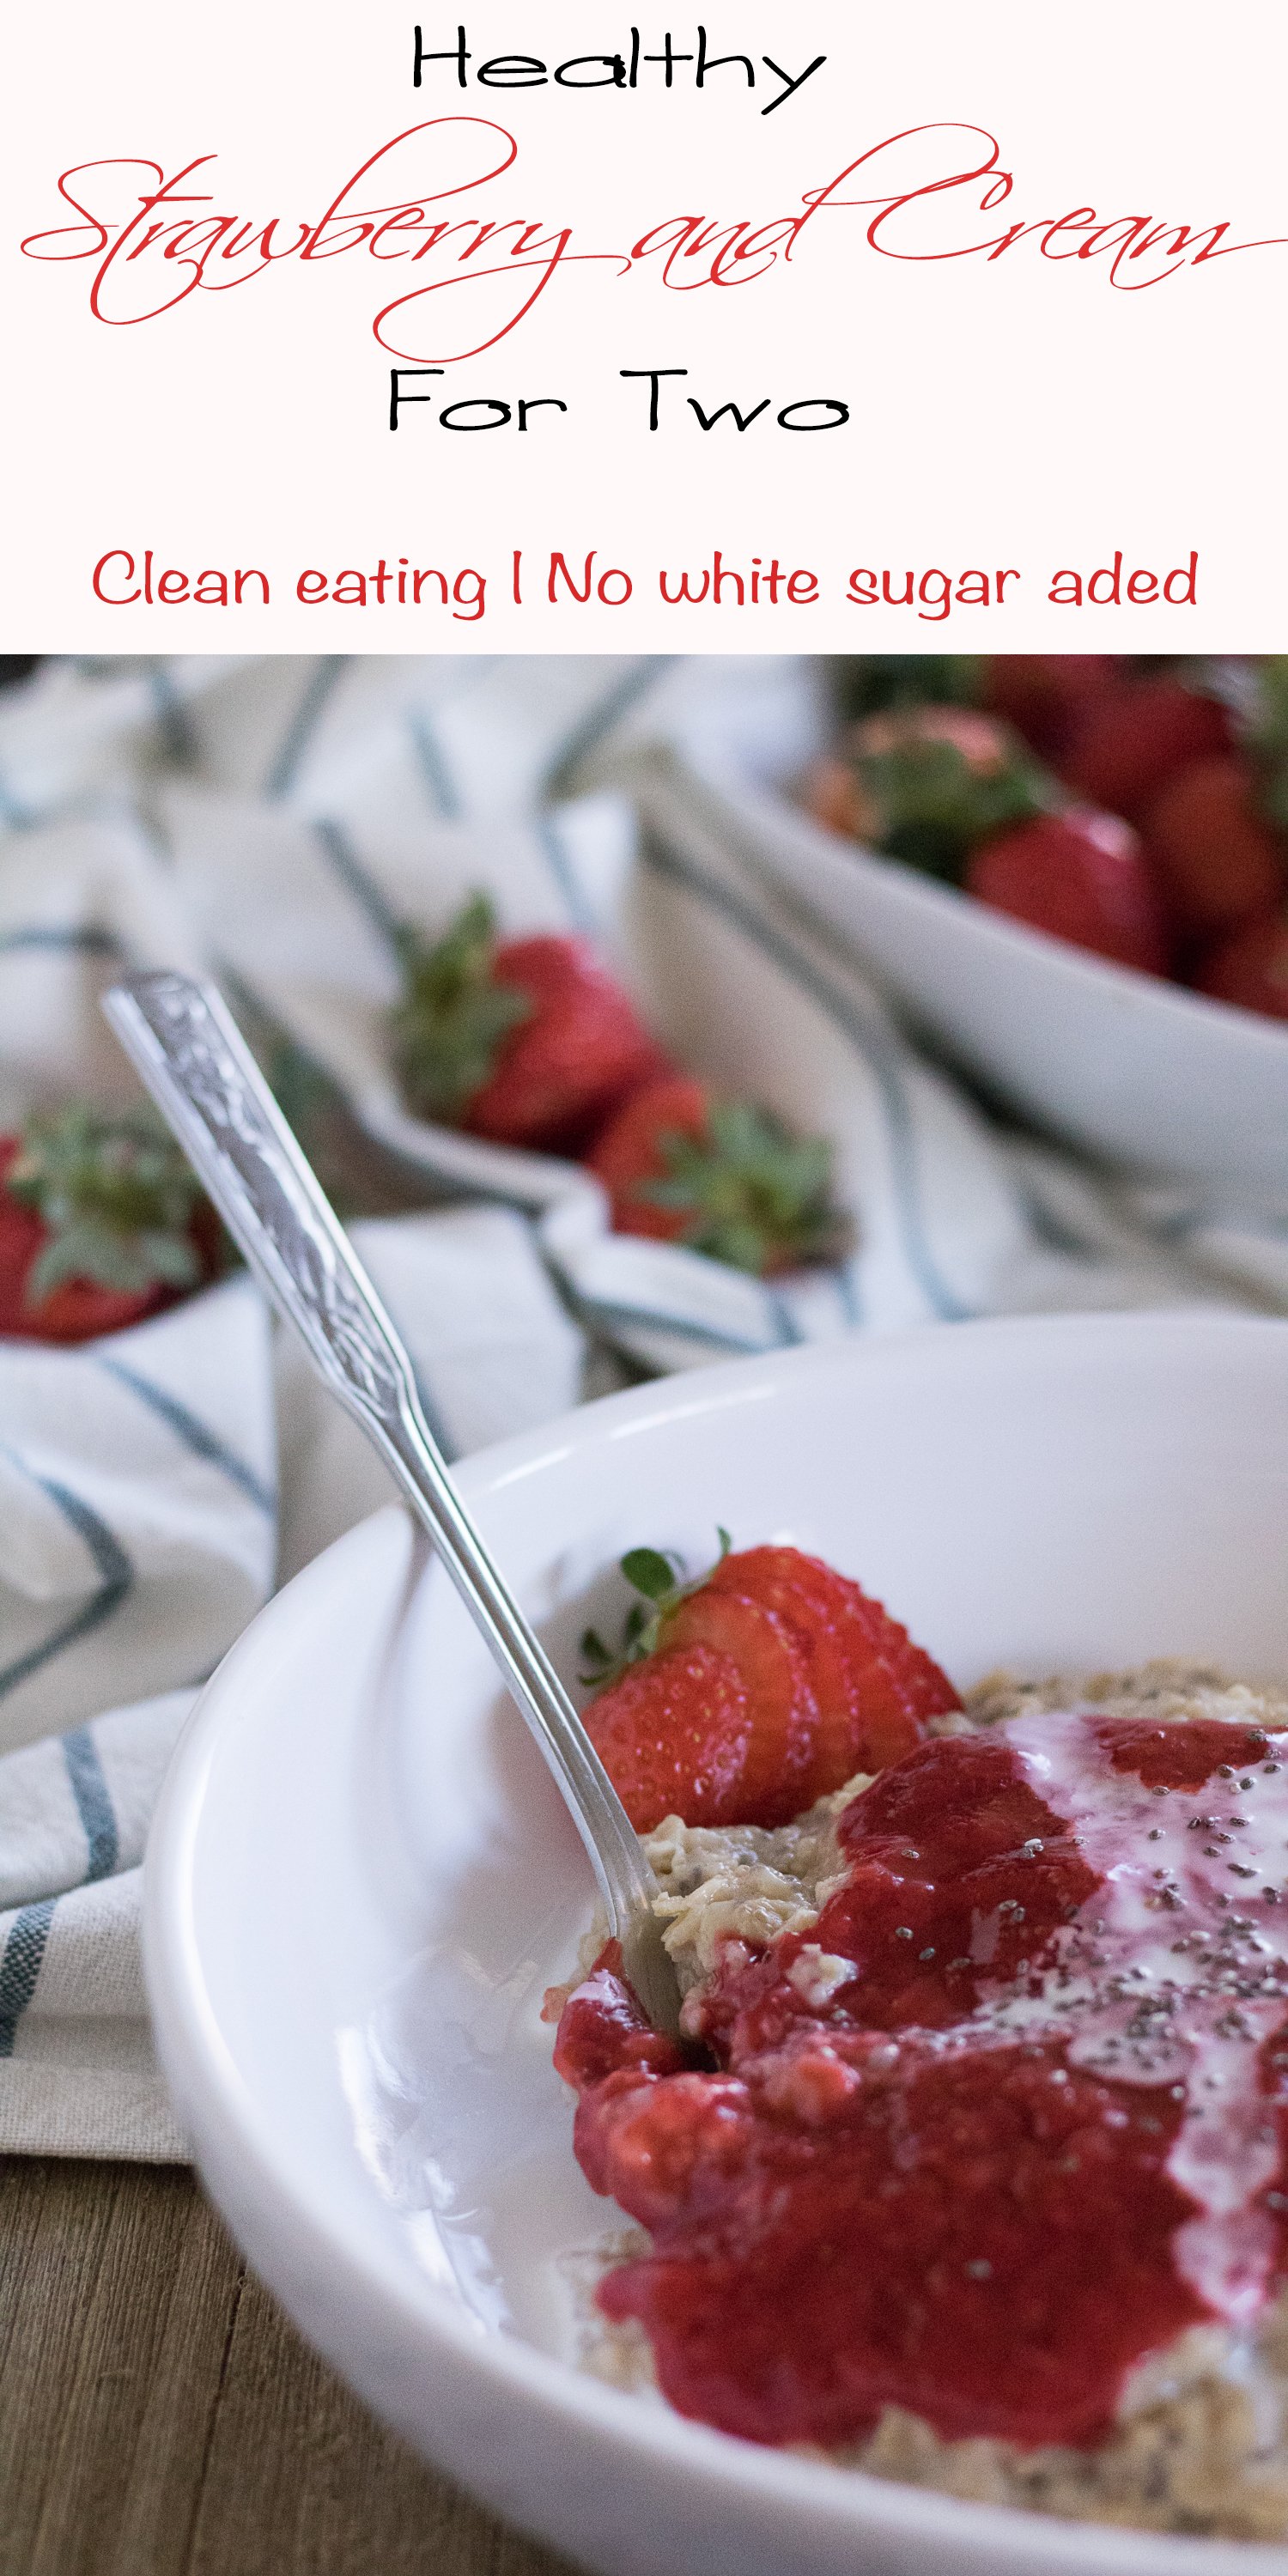 Strawberries and cream for two with no added white sugar